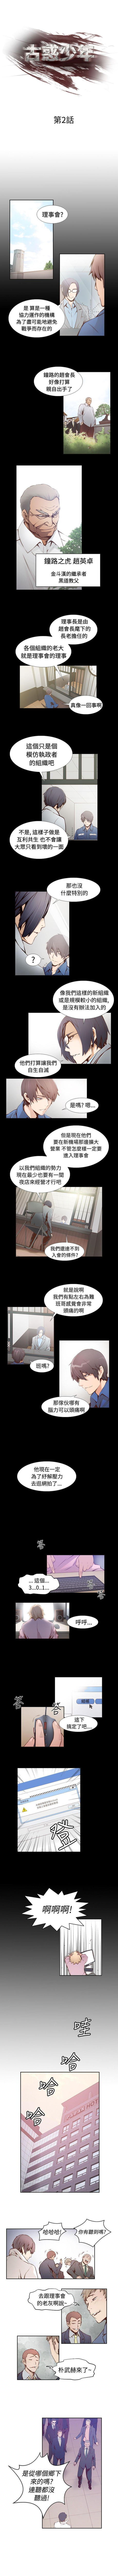 Spy 古惑少年 1-54 Outdoors - Page 5